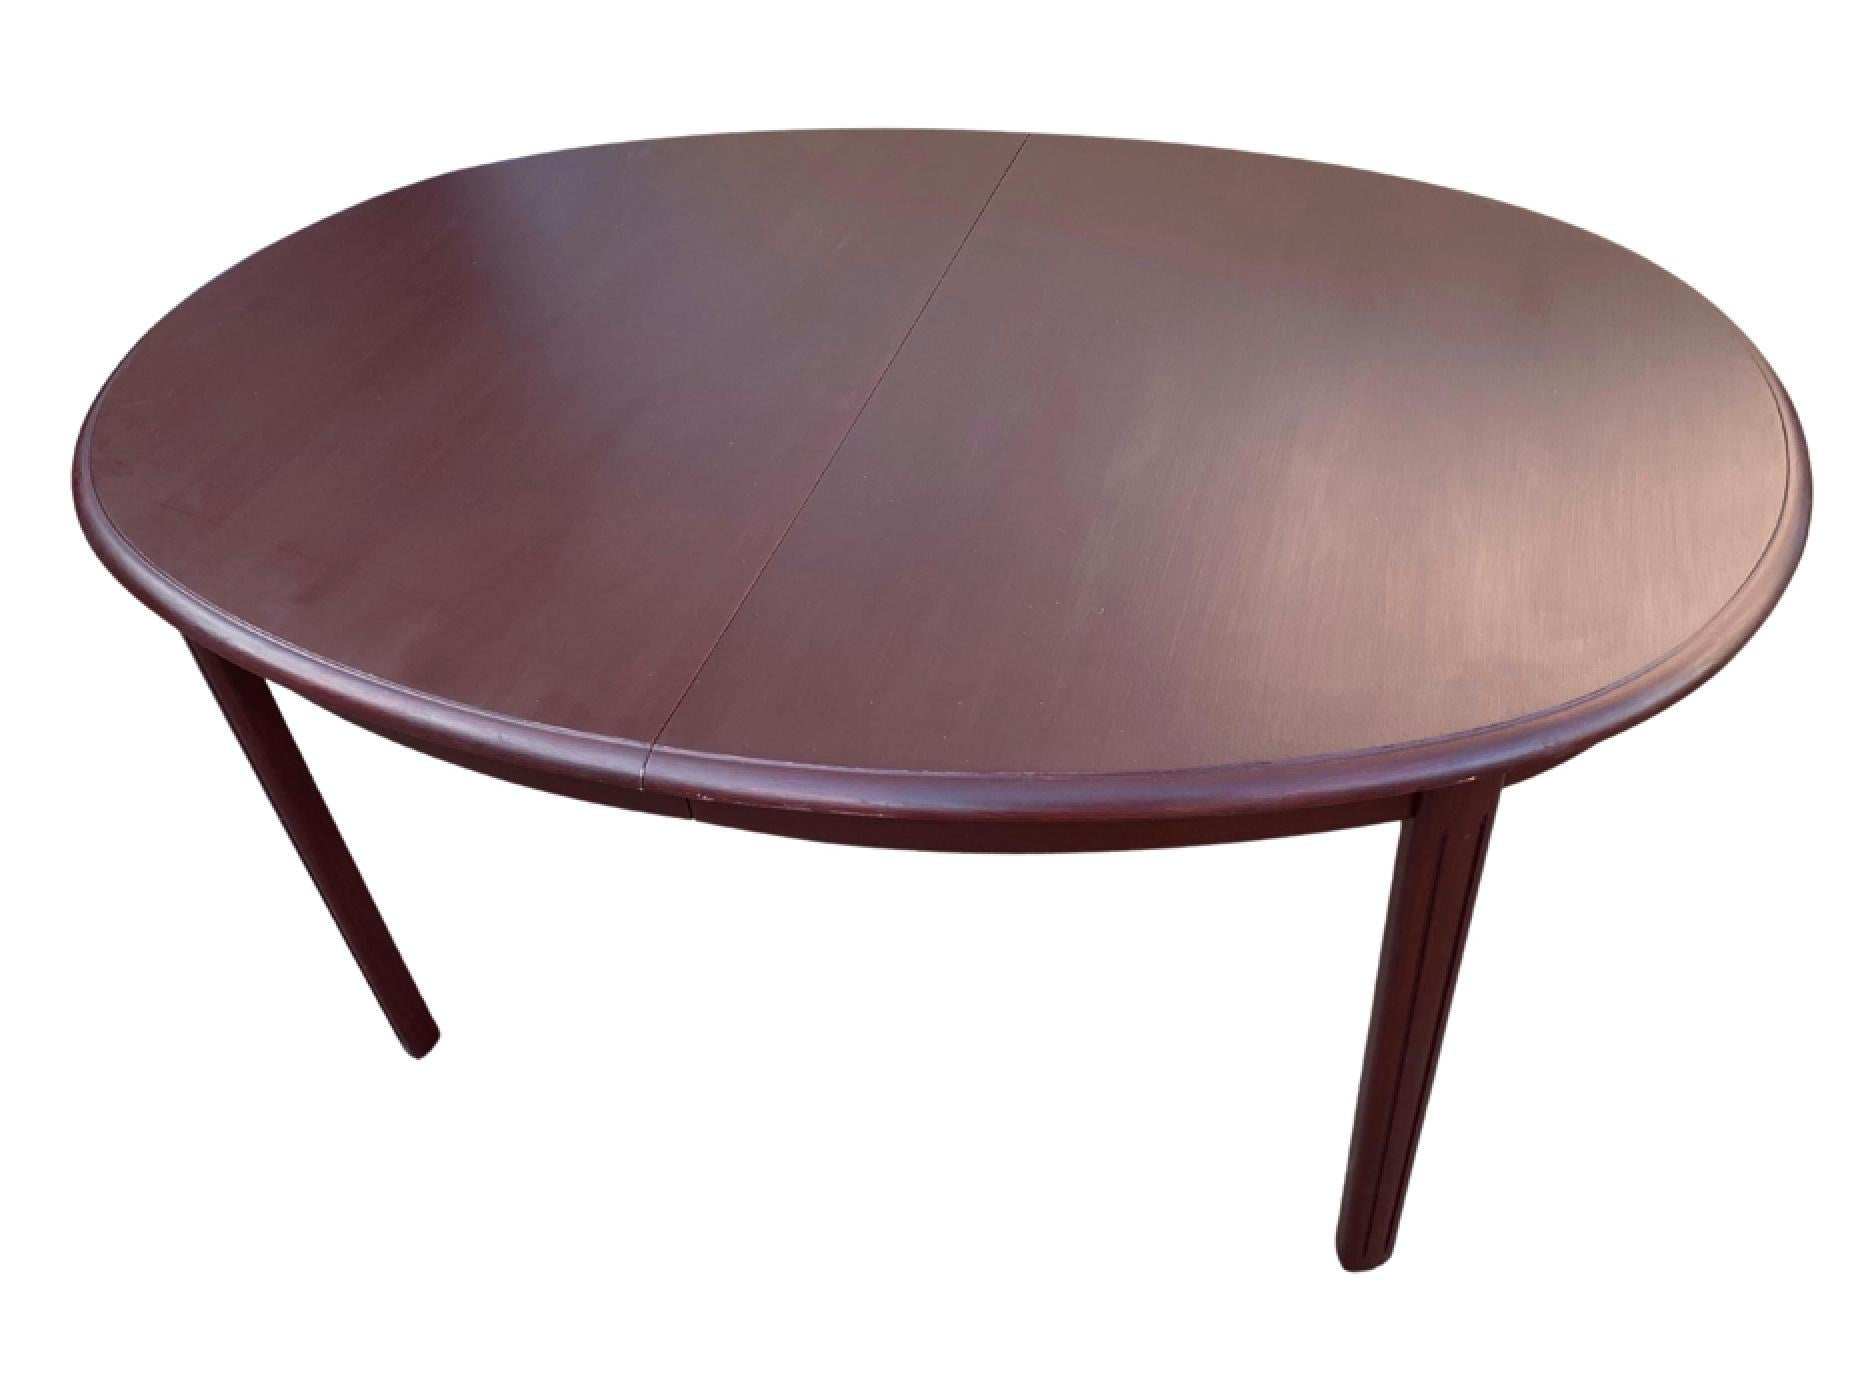 Beautiful dining table in mahogany by Danish furniture maker.

Designed and made I the 1950s. In the style of Johannes Andersen.

The table has two leaf.

Length with no leafs: 150cm

Length with one leaf: 195cm

Length with two leafs: